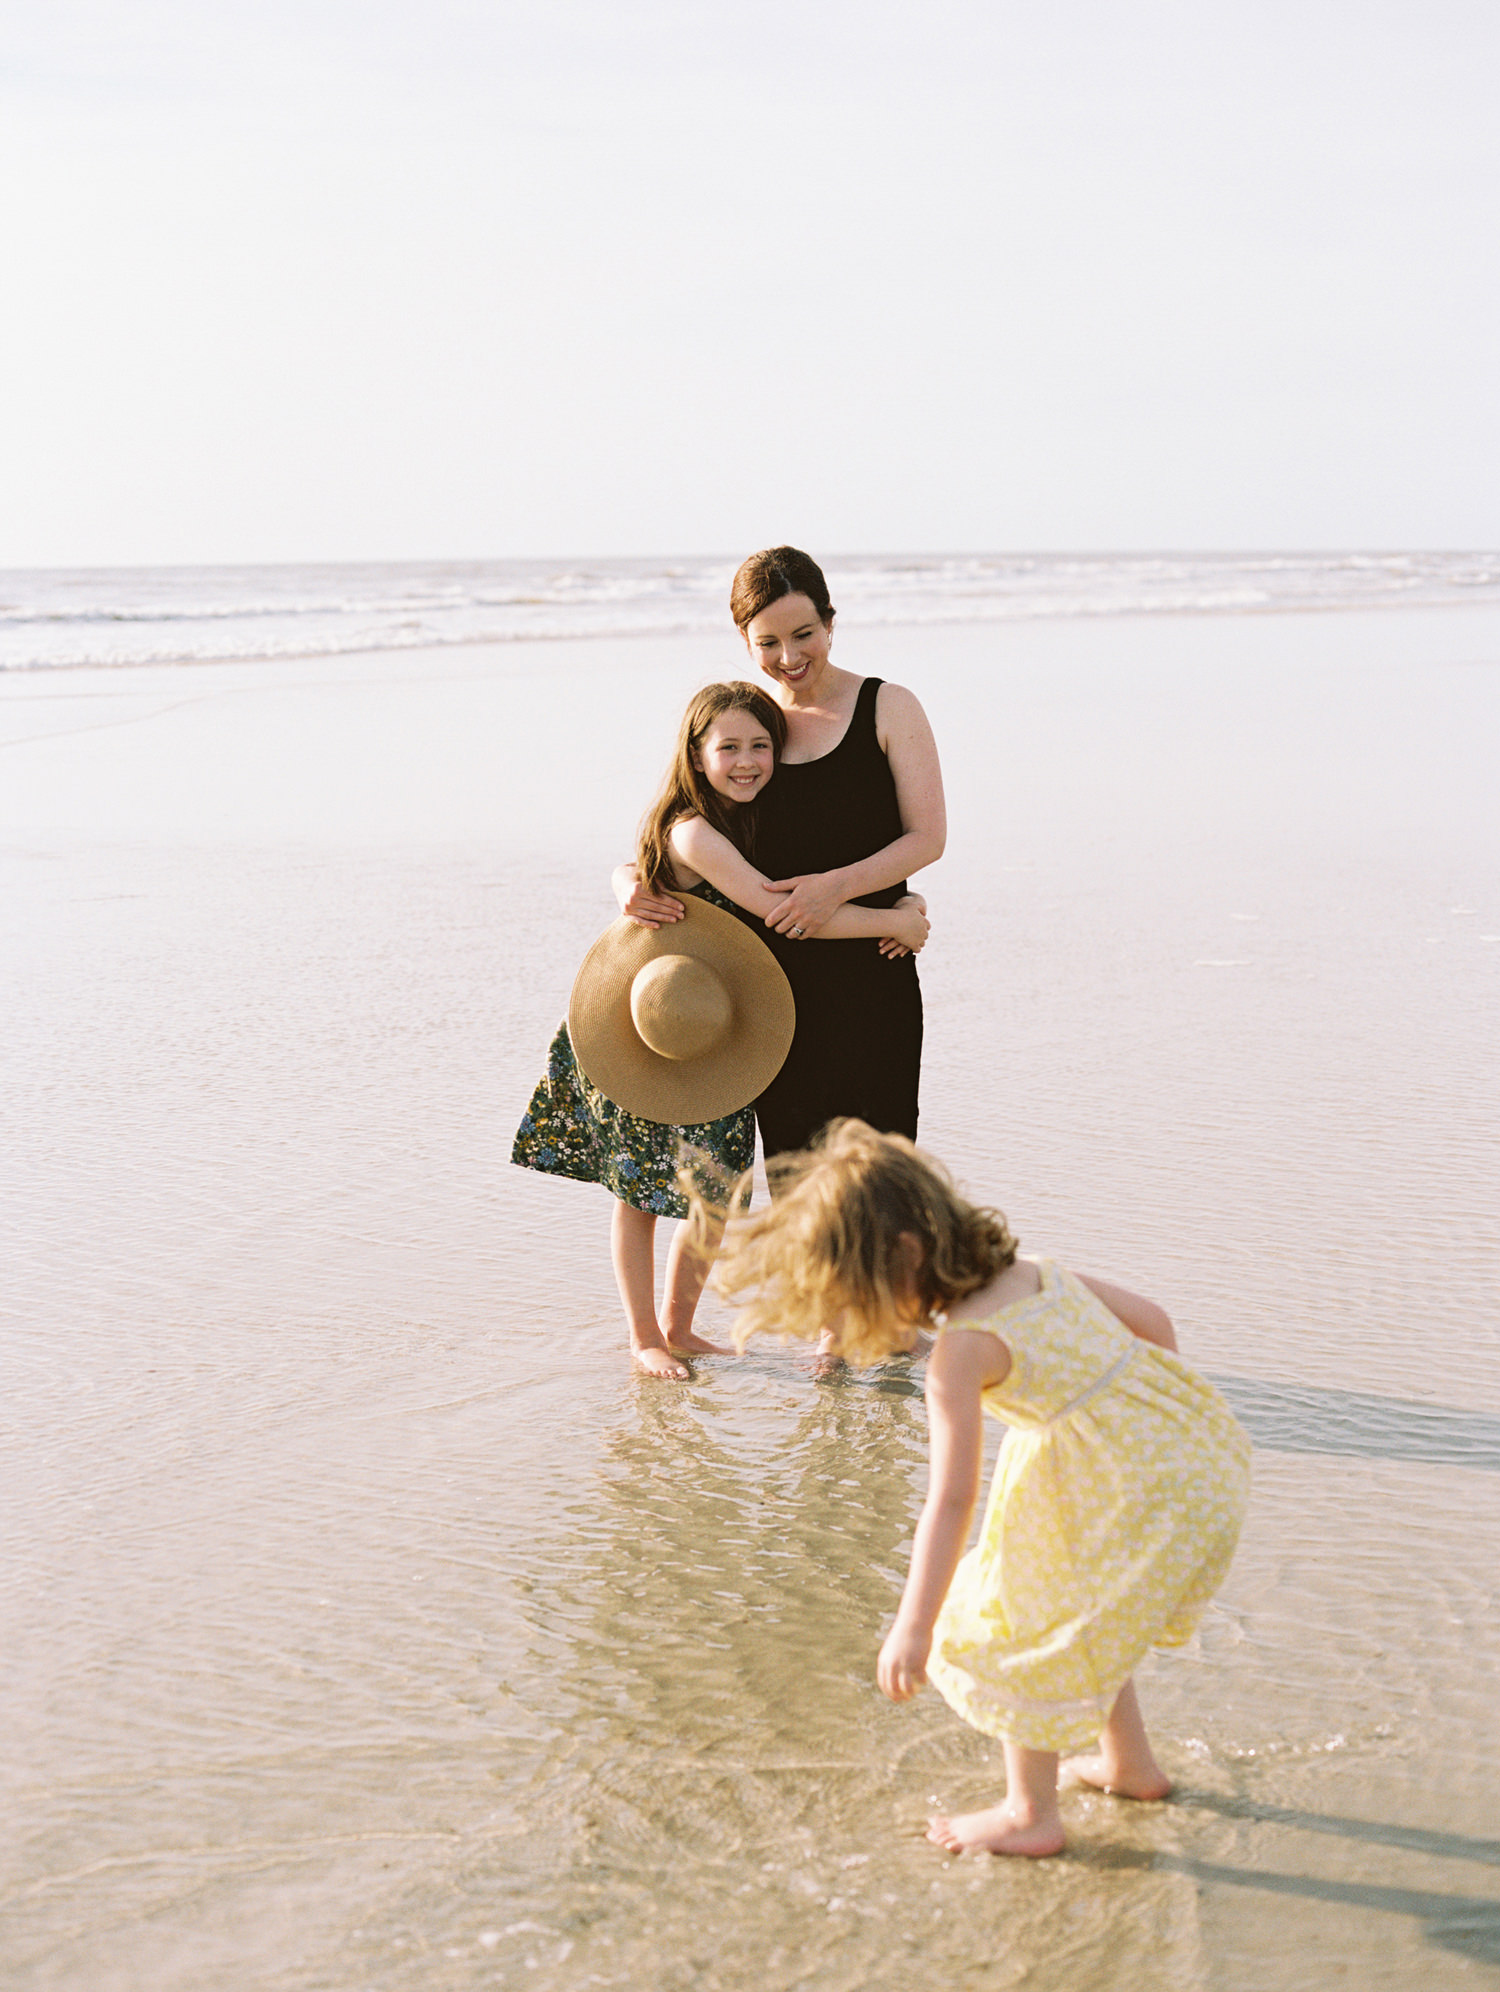 mom in black dress at the beach, hugging older daughter while younger child picks up seashells